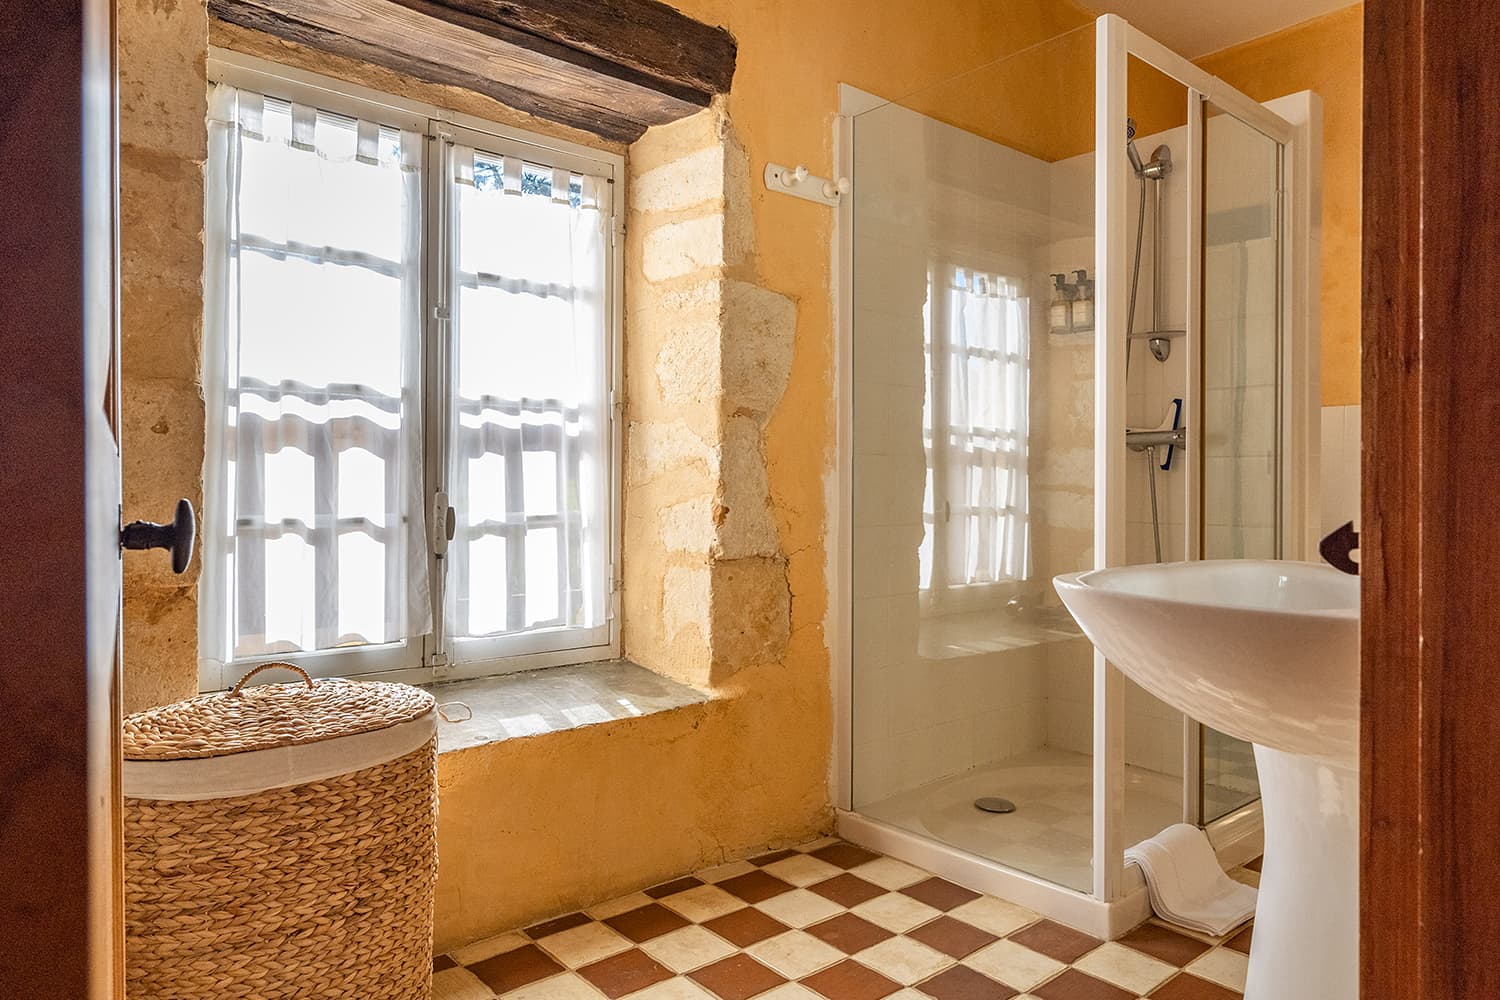 Bathroom | Holiday home in the Dordogne